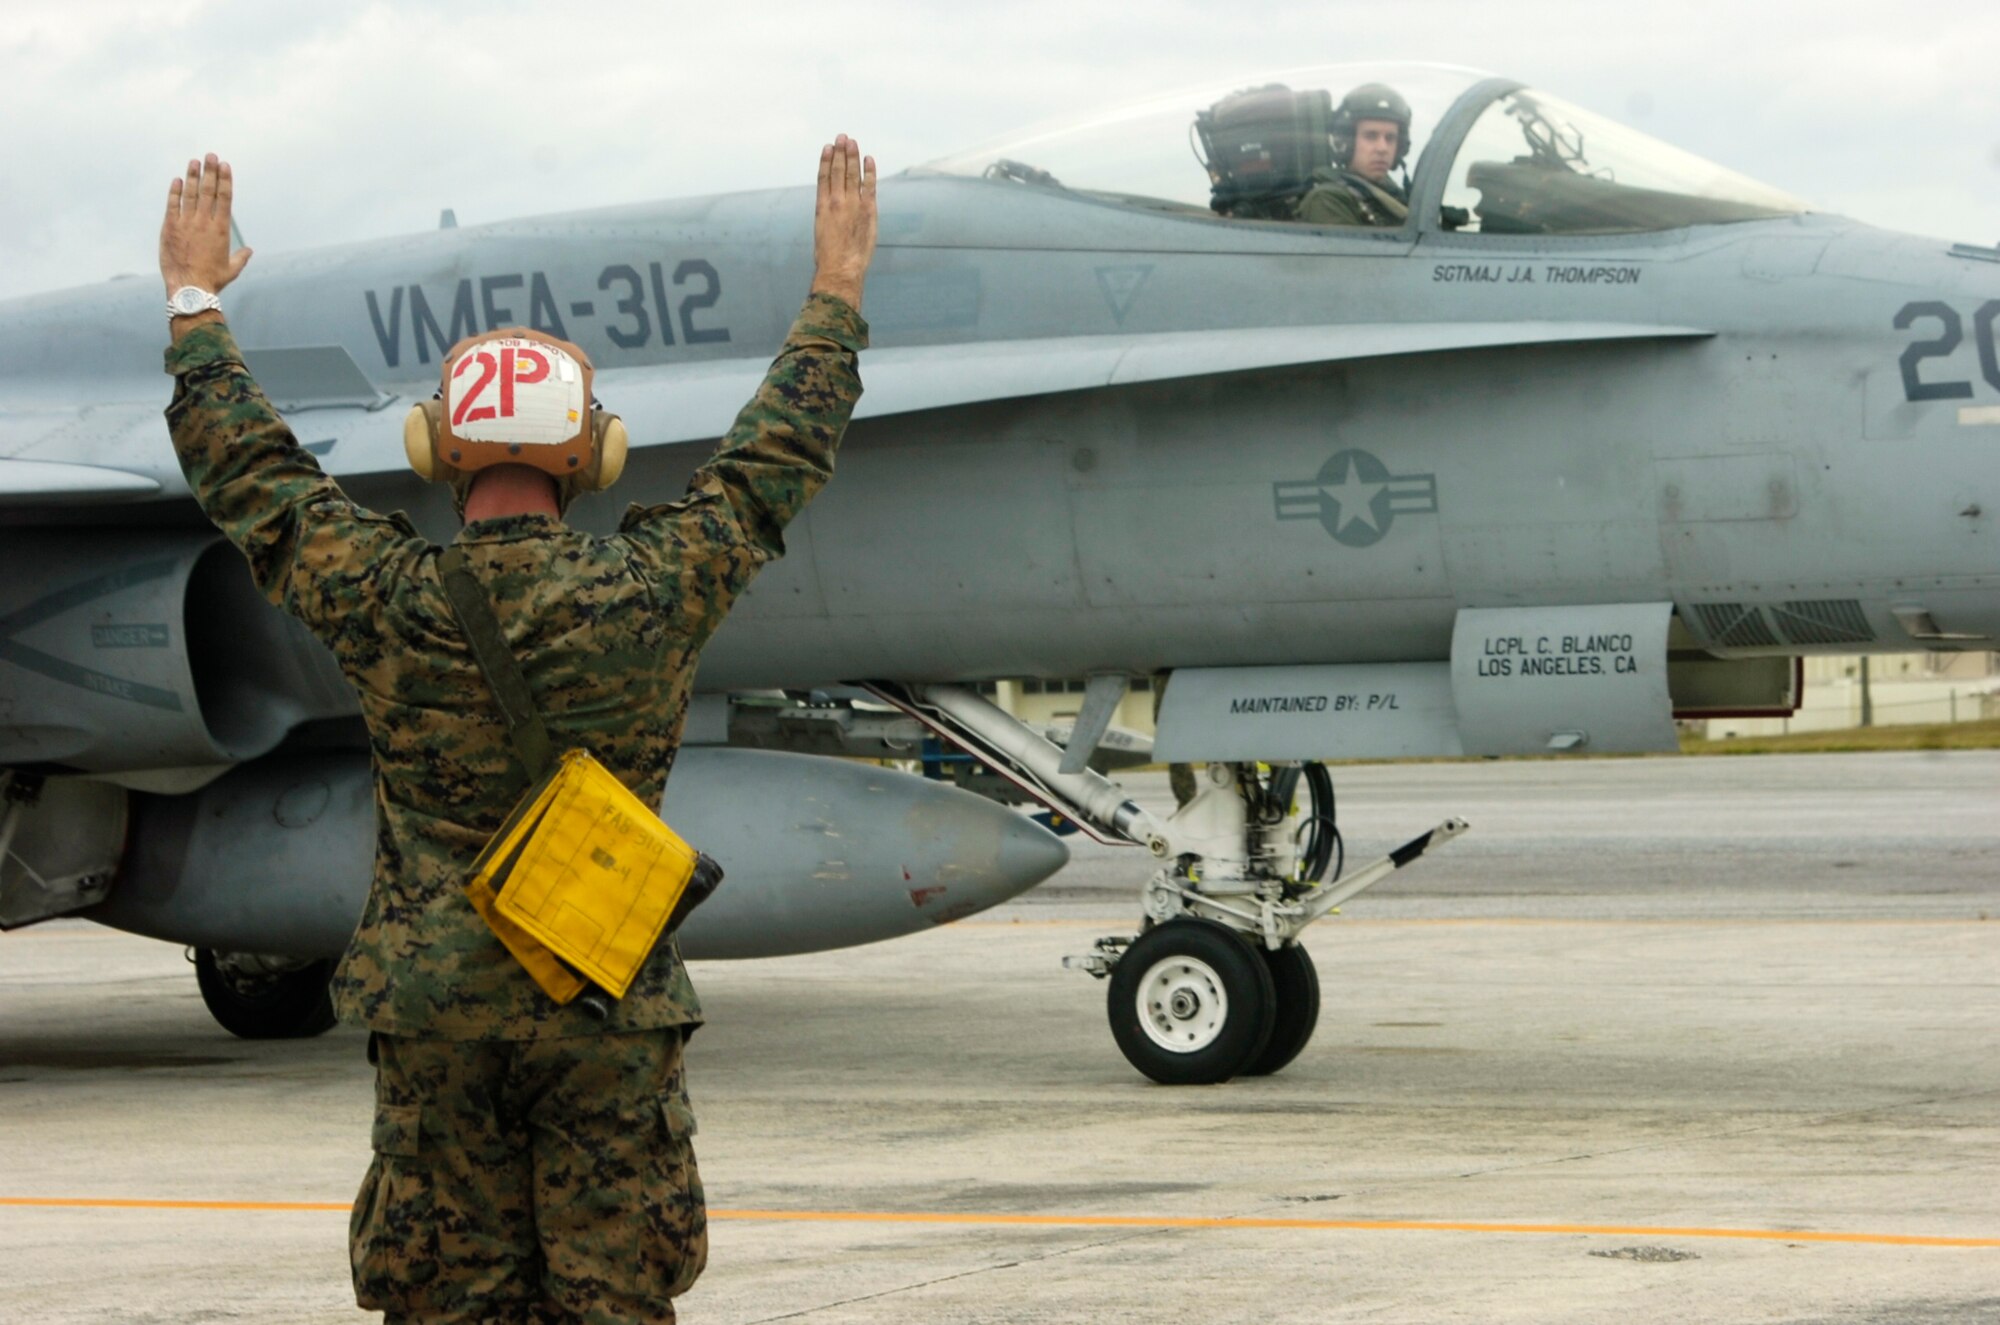 Cpl. Sterling L. Robertson, a powerliner for Marine Fighter Attack Squadron 212, instructs the pilot, Capt. Olgierd J. Weiss, with take off commands at Kadena Air Base, Japan, Dec. 4, 2007.  A powerliners job is to instruct on start up and launch out the pilot. Powerliners are the "eyes on the ground" for the pilot. 
(U.S. Marine Corps photo/Lance Cpl. Jacqueline Diaz)